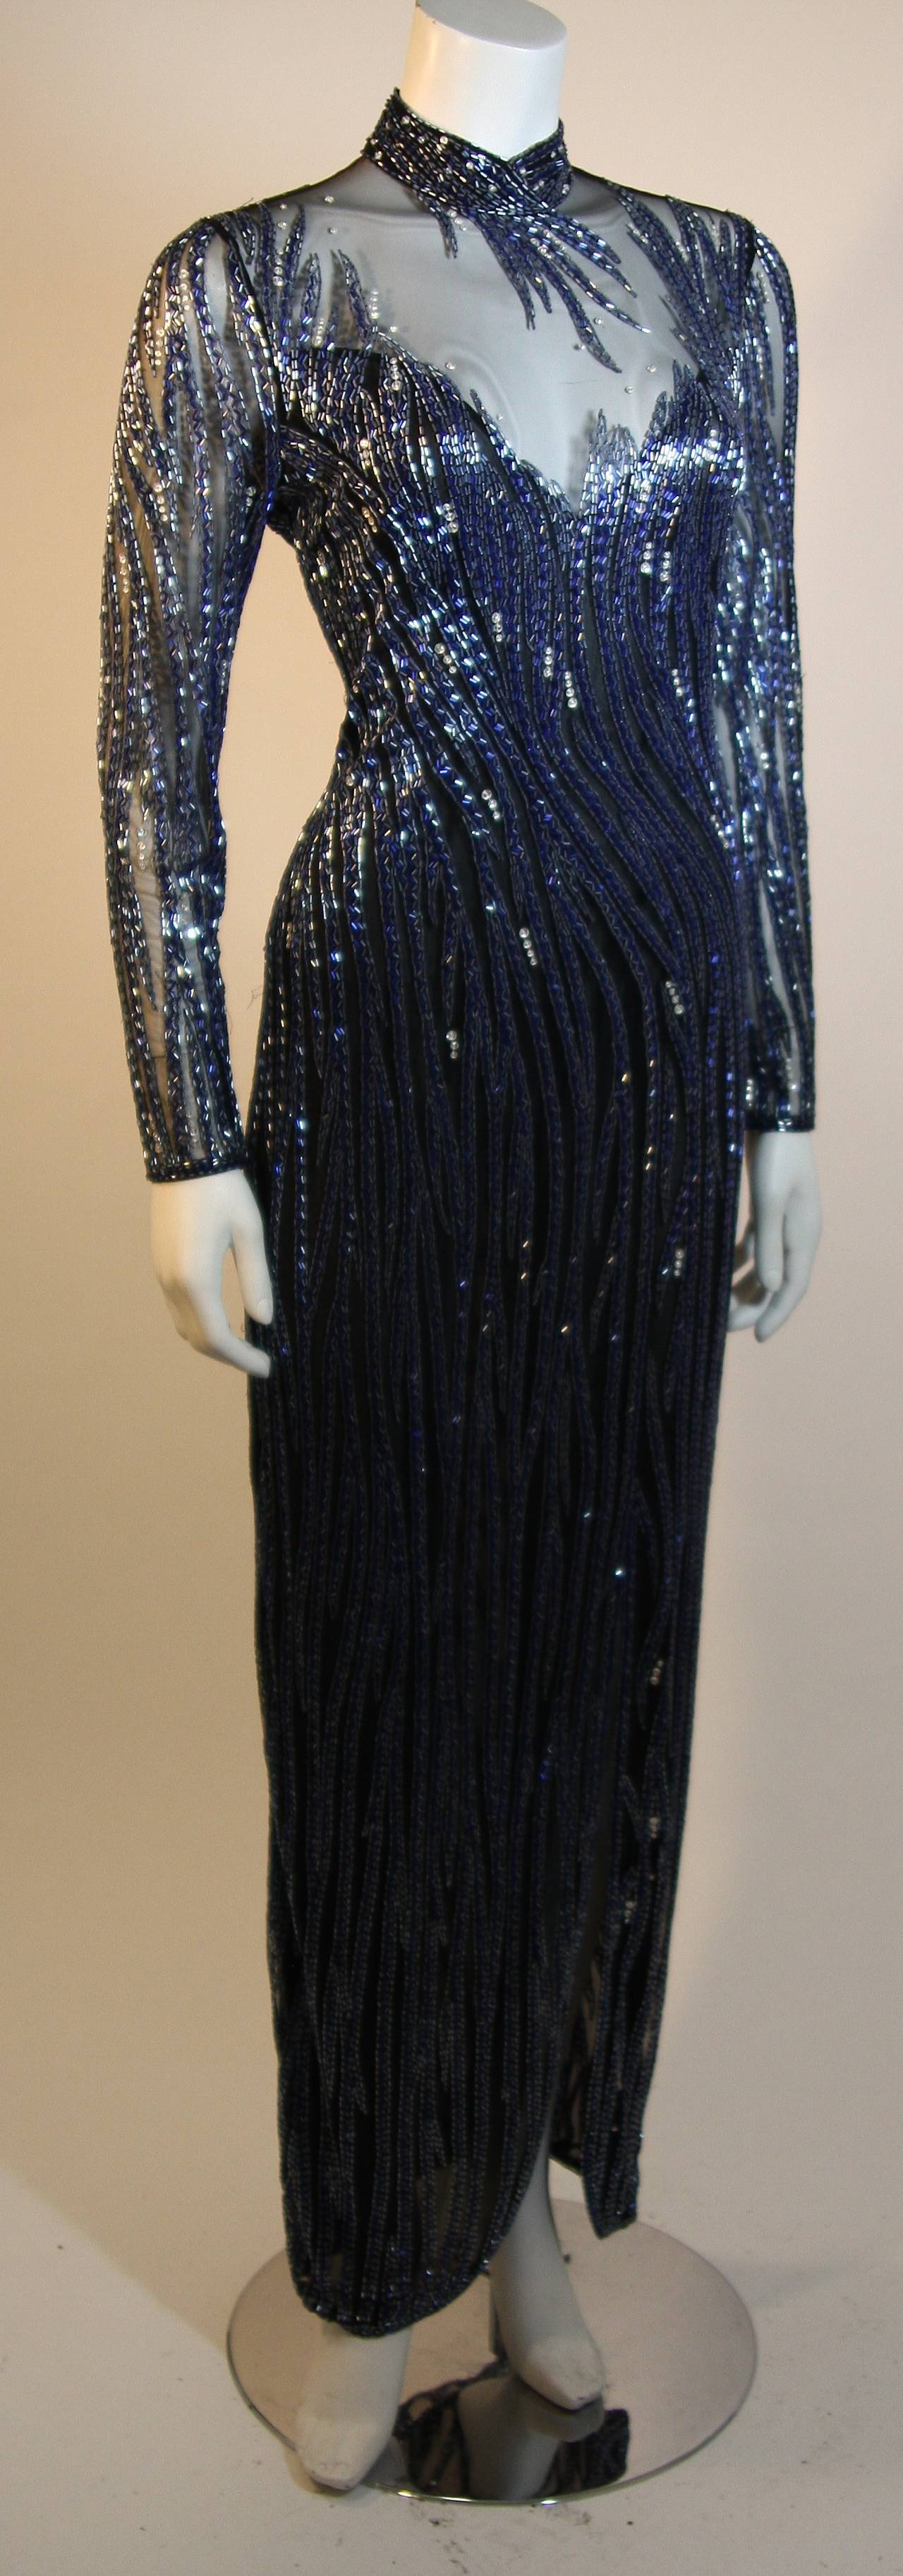 Beautiful glass beaded long sleeve gown adorned with varying shades of deep sapphire to blue silver over a sheer fitted black bodice, clinging hip, with an off-center slit at front. A smattering of rhinestones throughout add extra sparkle to this